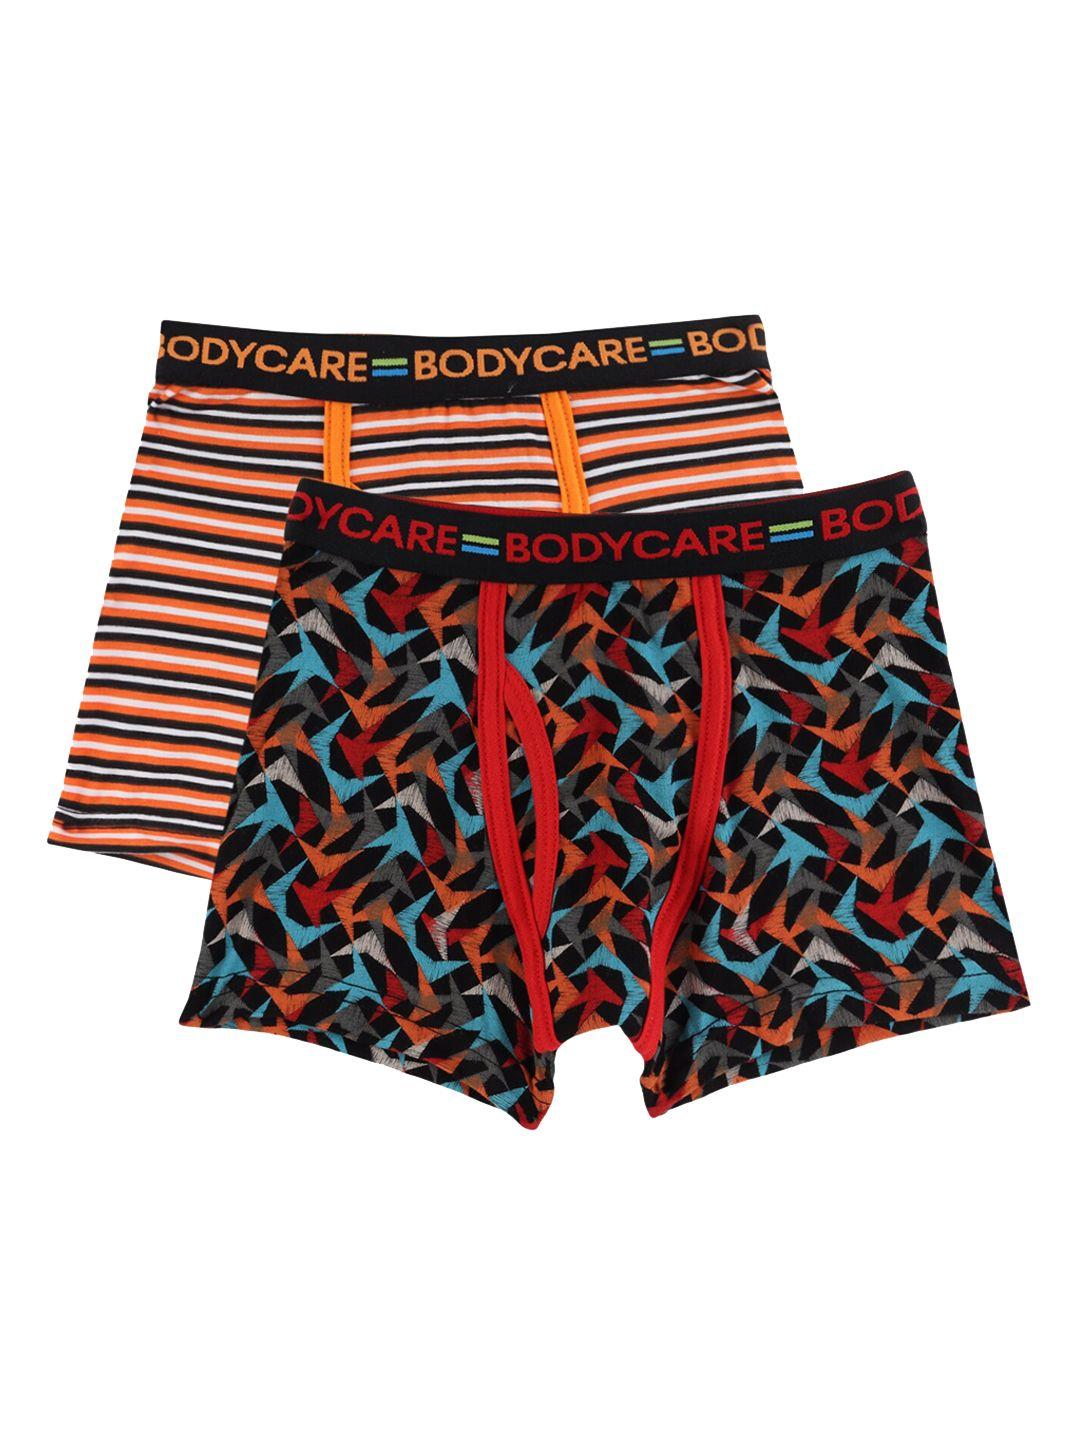 bodycare-kids-boys-pack-of-2-red-&-orange-coloured-solid-cotton-trunk-kga2062ro-pk004